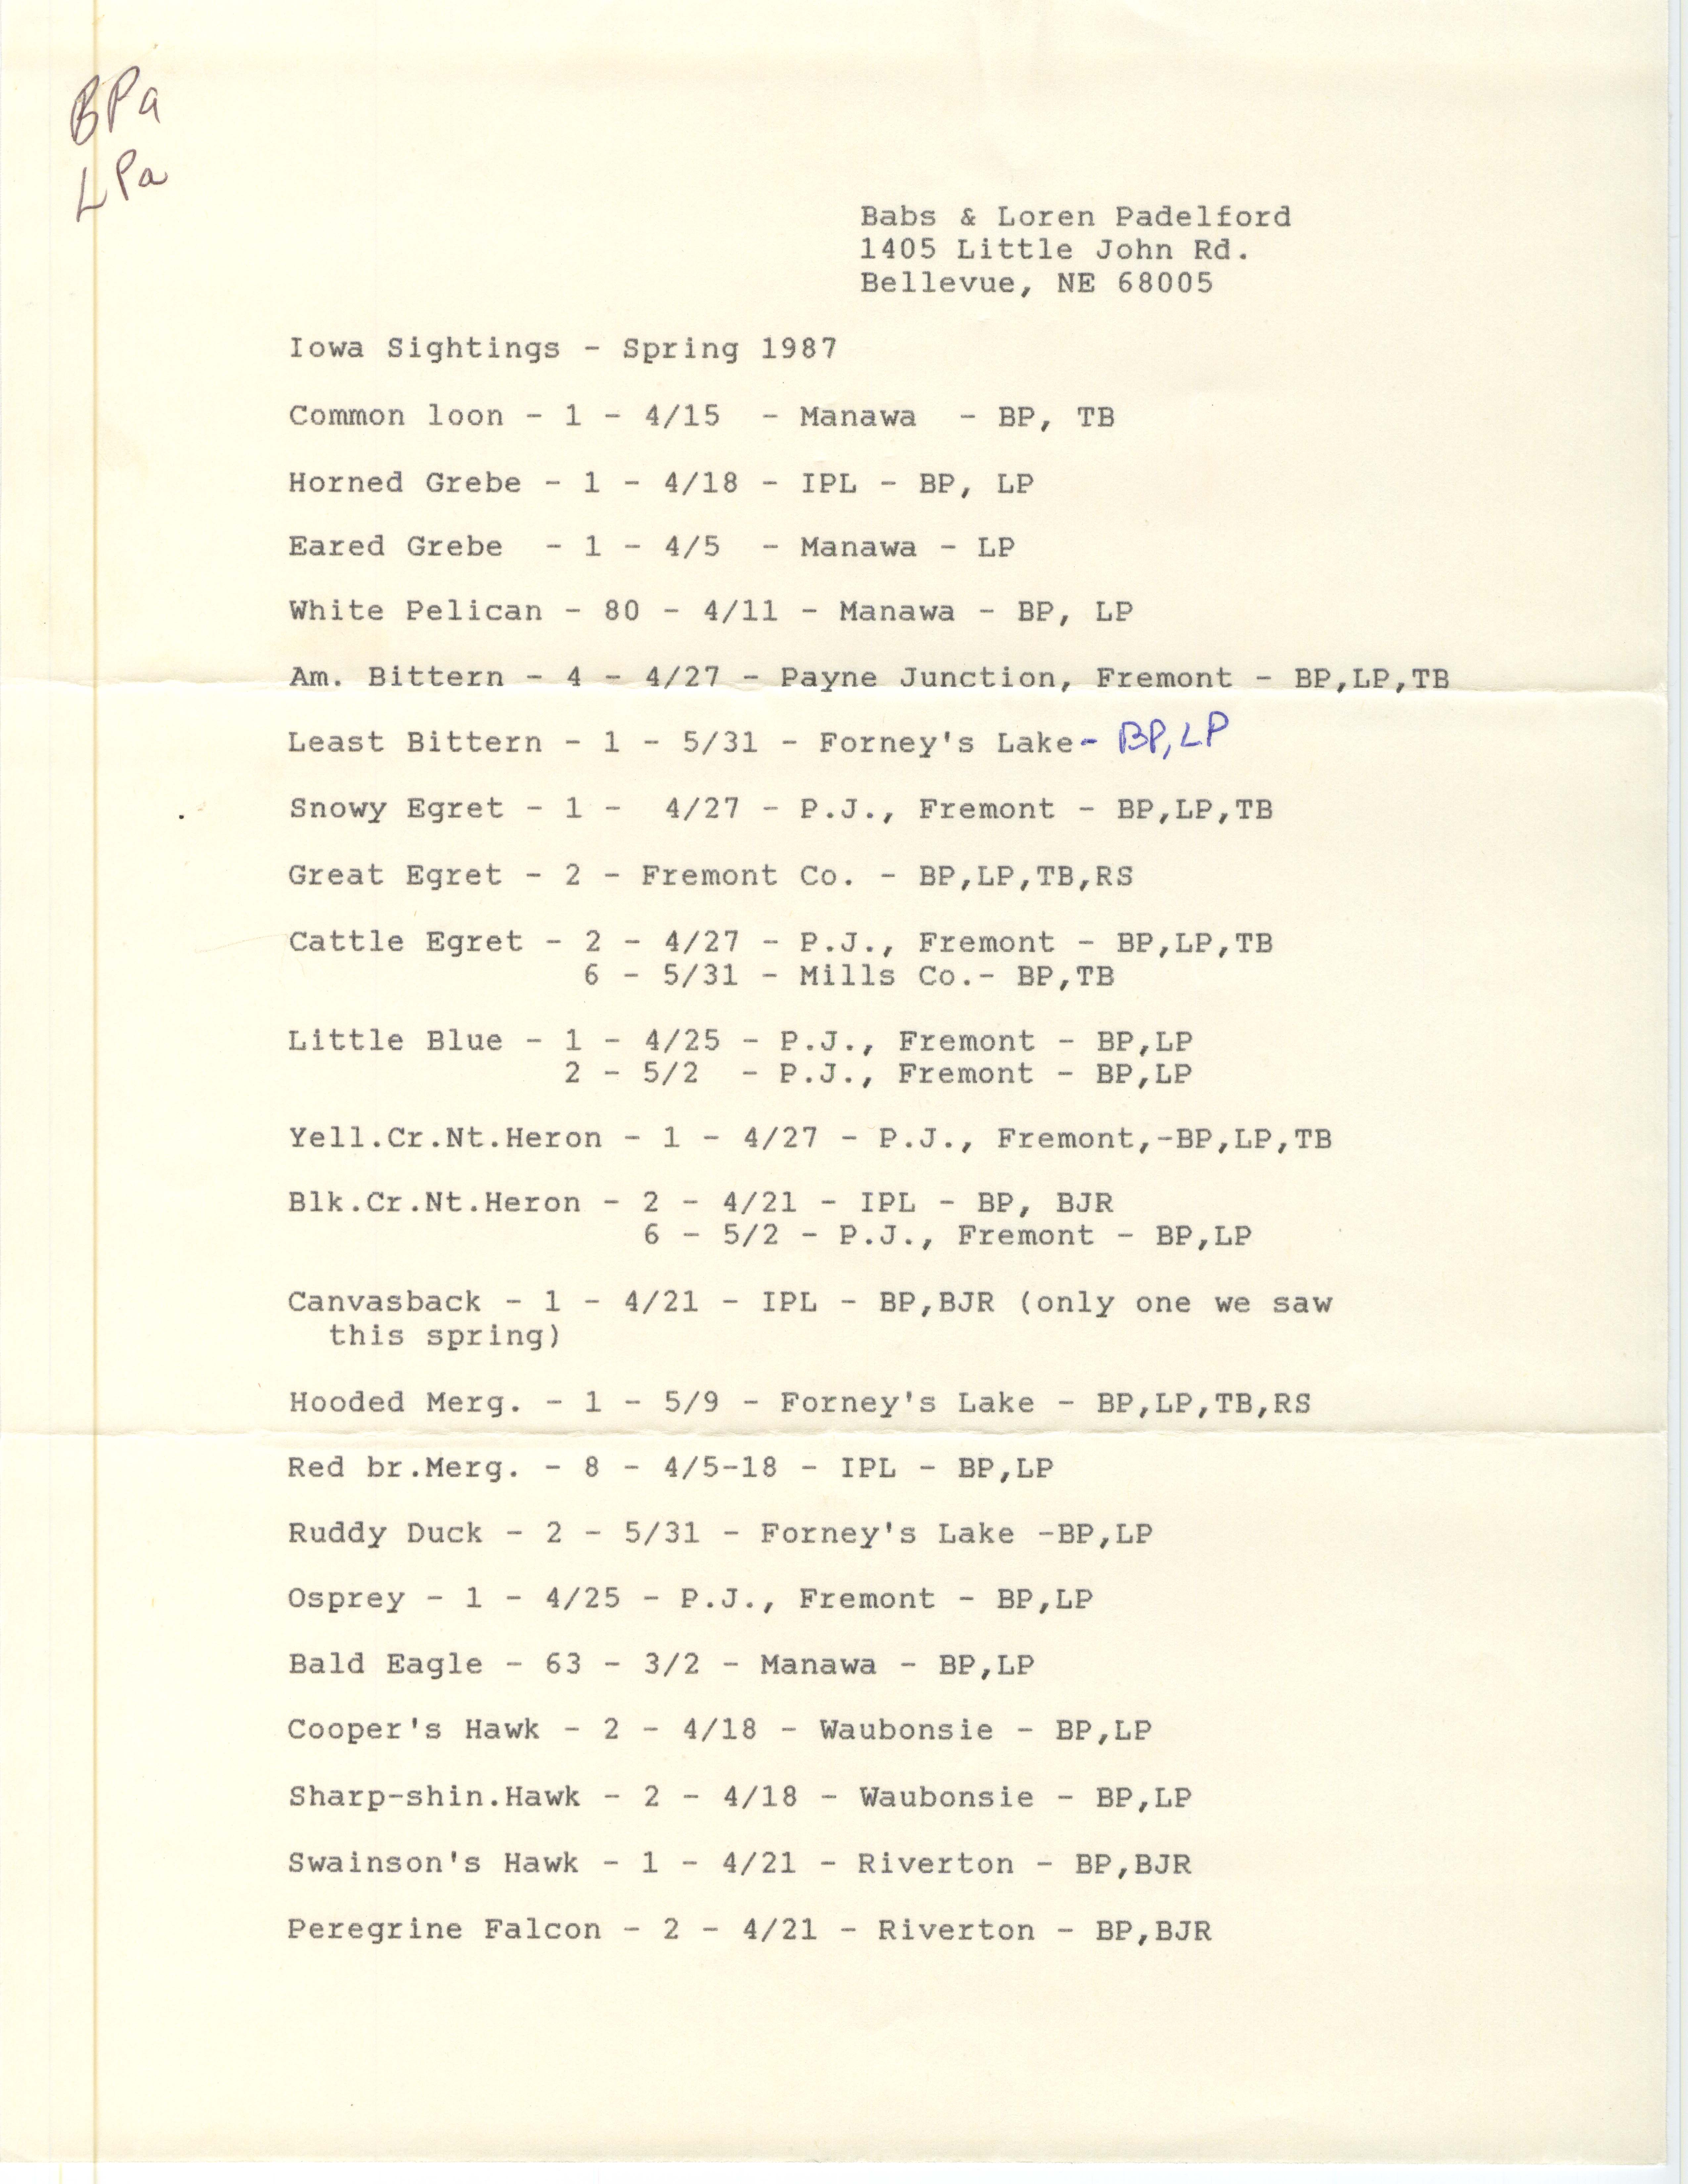 Field notes contributed by Babs Padelford and Loren Padelford, spring 1987